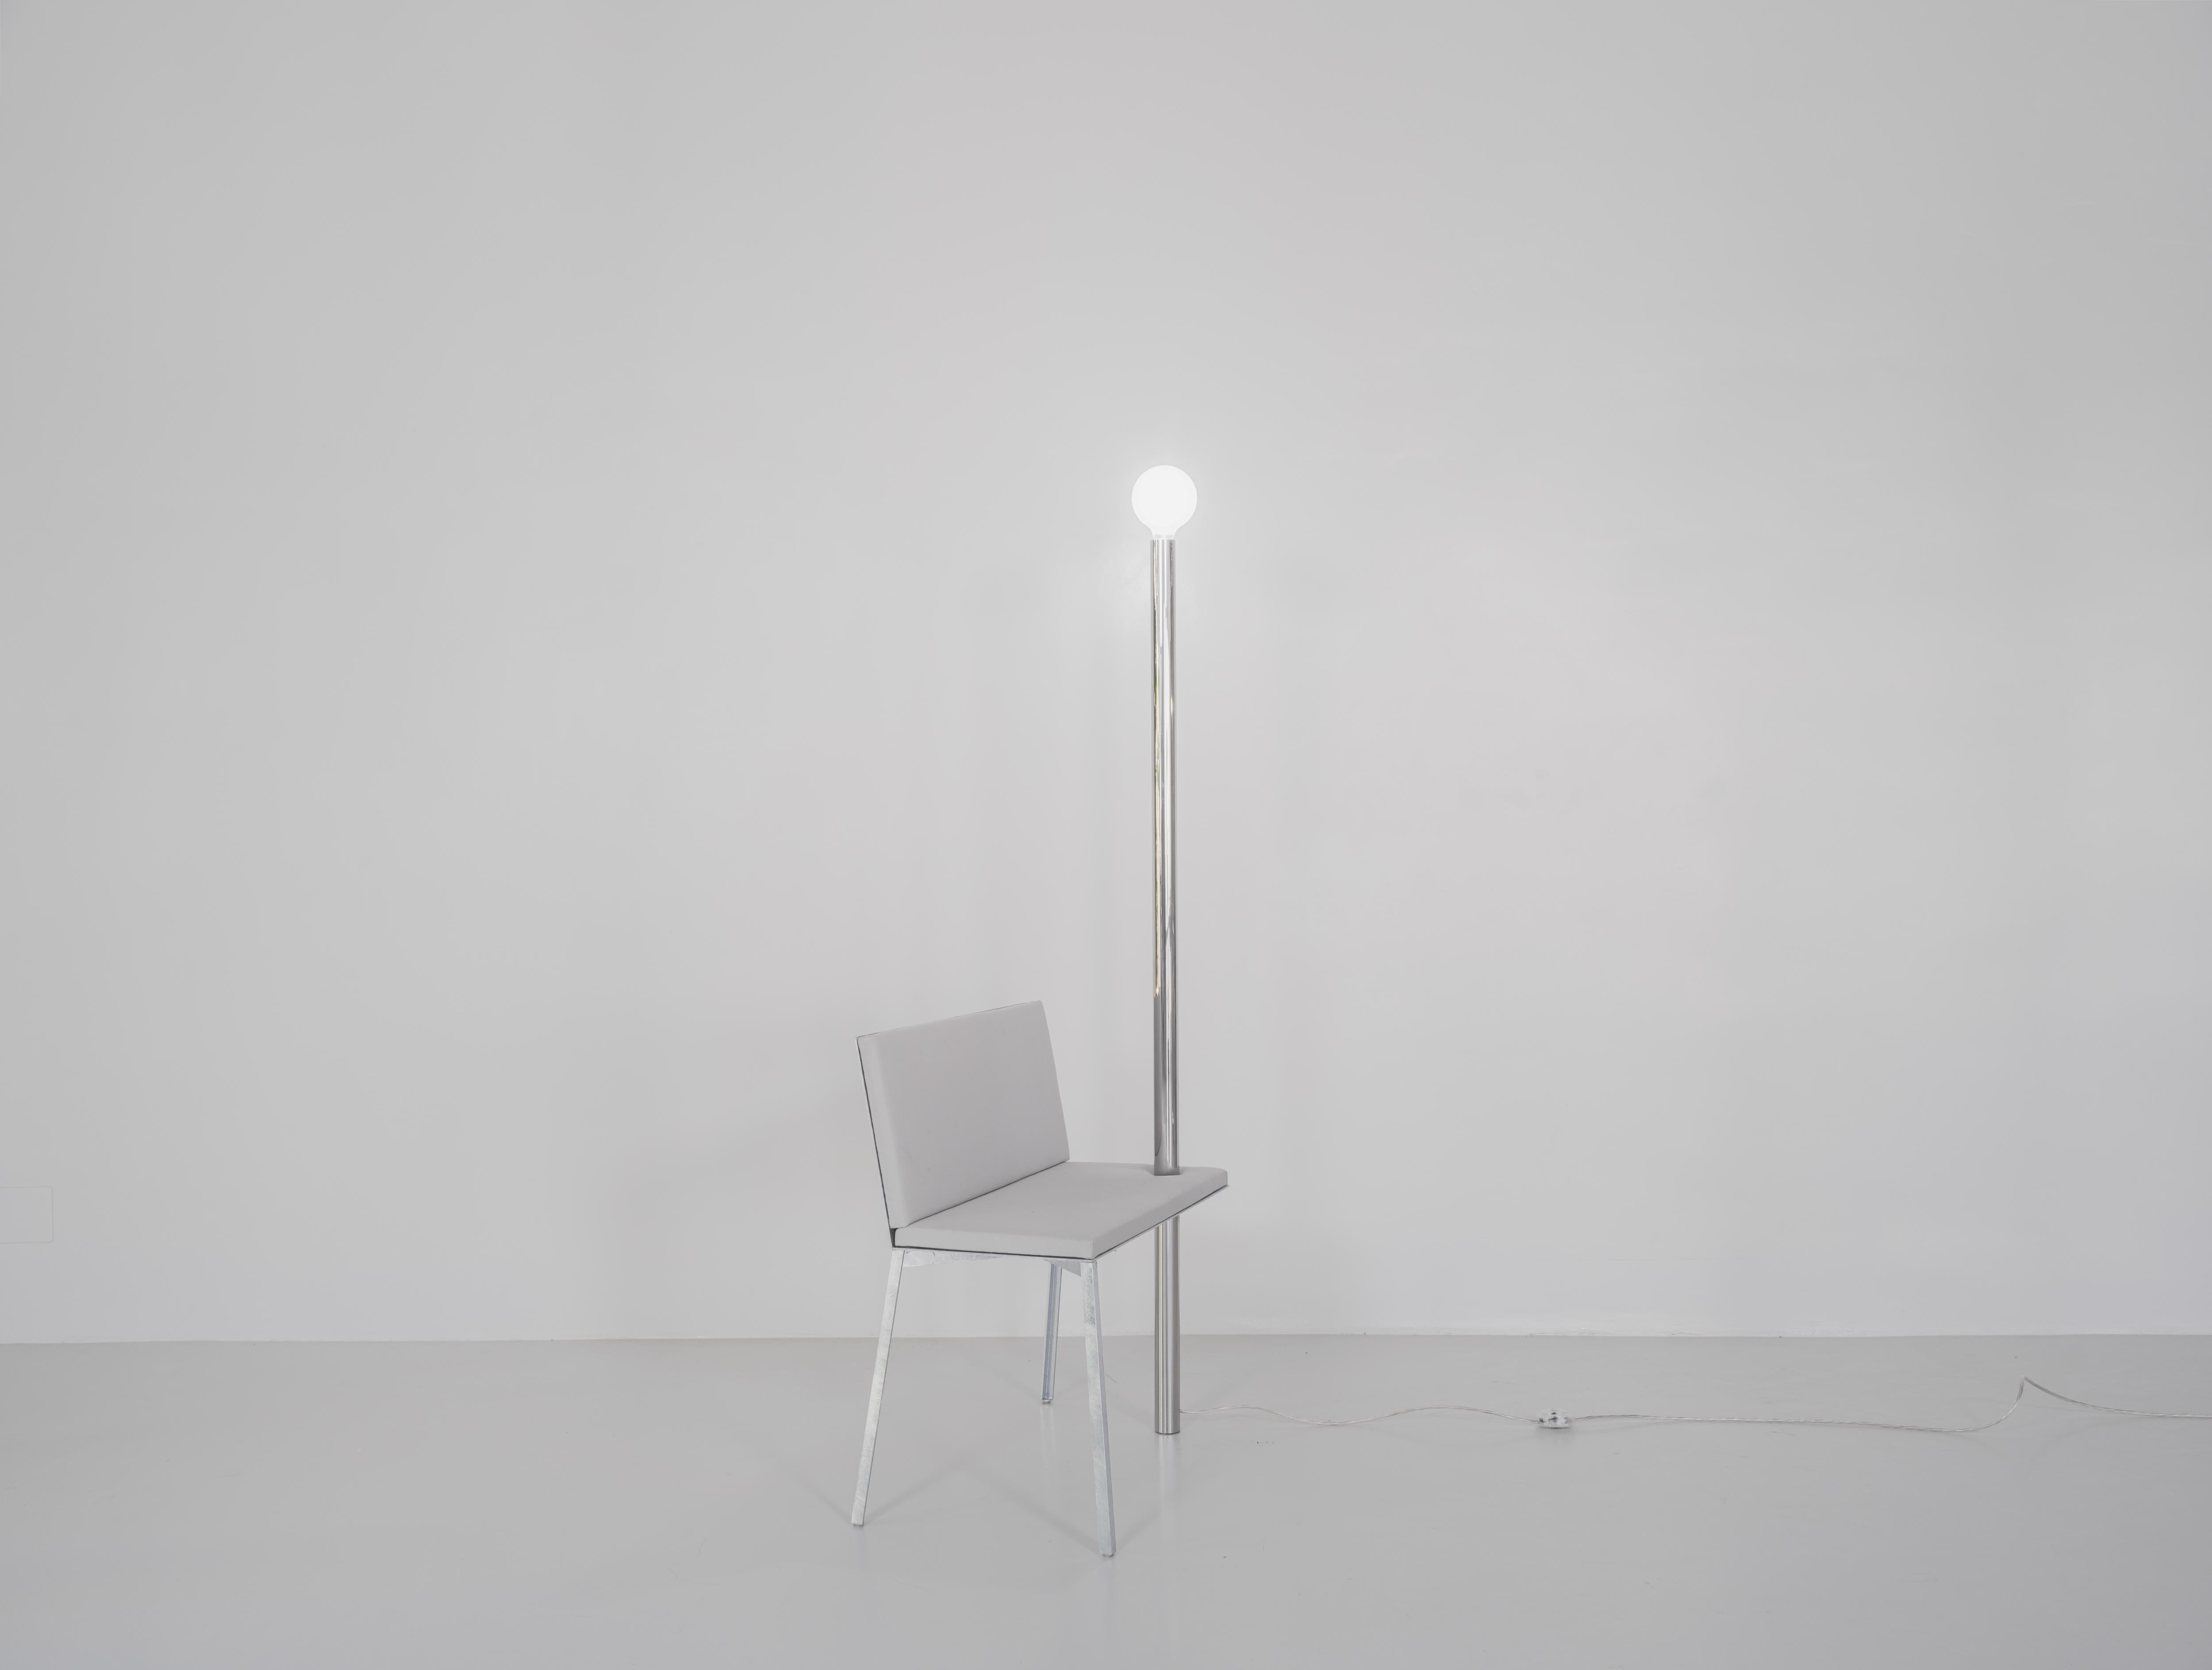 Sam Chermayeff 
Chair with light
From the series “Beasts”
Produced in exclusive for Side Gallery
Manufactured by ERTL und ZULL
Berlin, 2021
Galvanized steel, high polished steel, upholstery
Contemporary Design

Measurements
90,8 cm x 51 cm